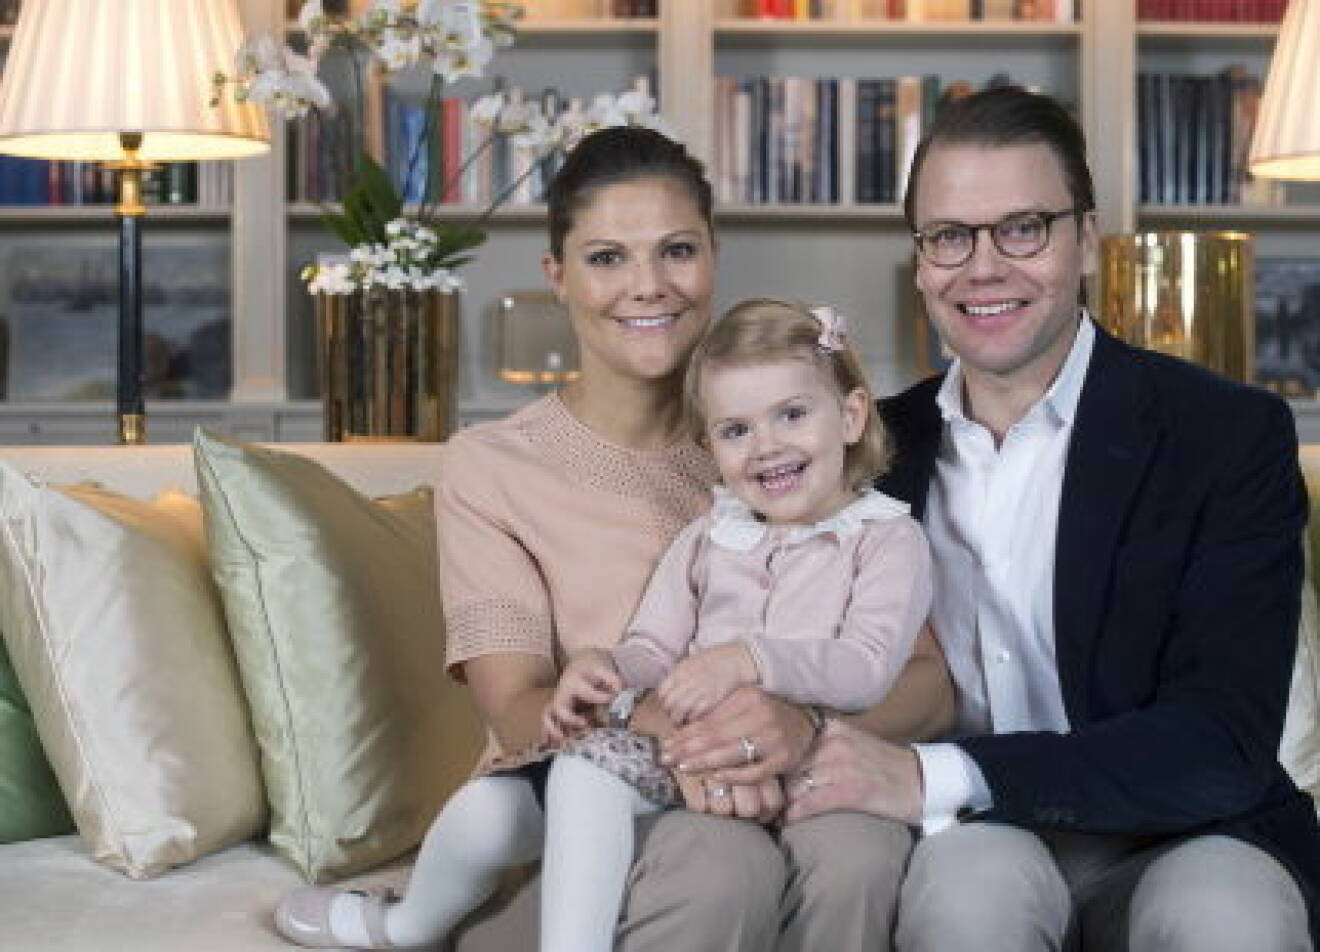 Crown Princess Victoria and Prince Daniel with their daughter Princess Estelle